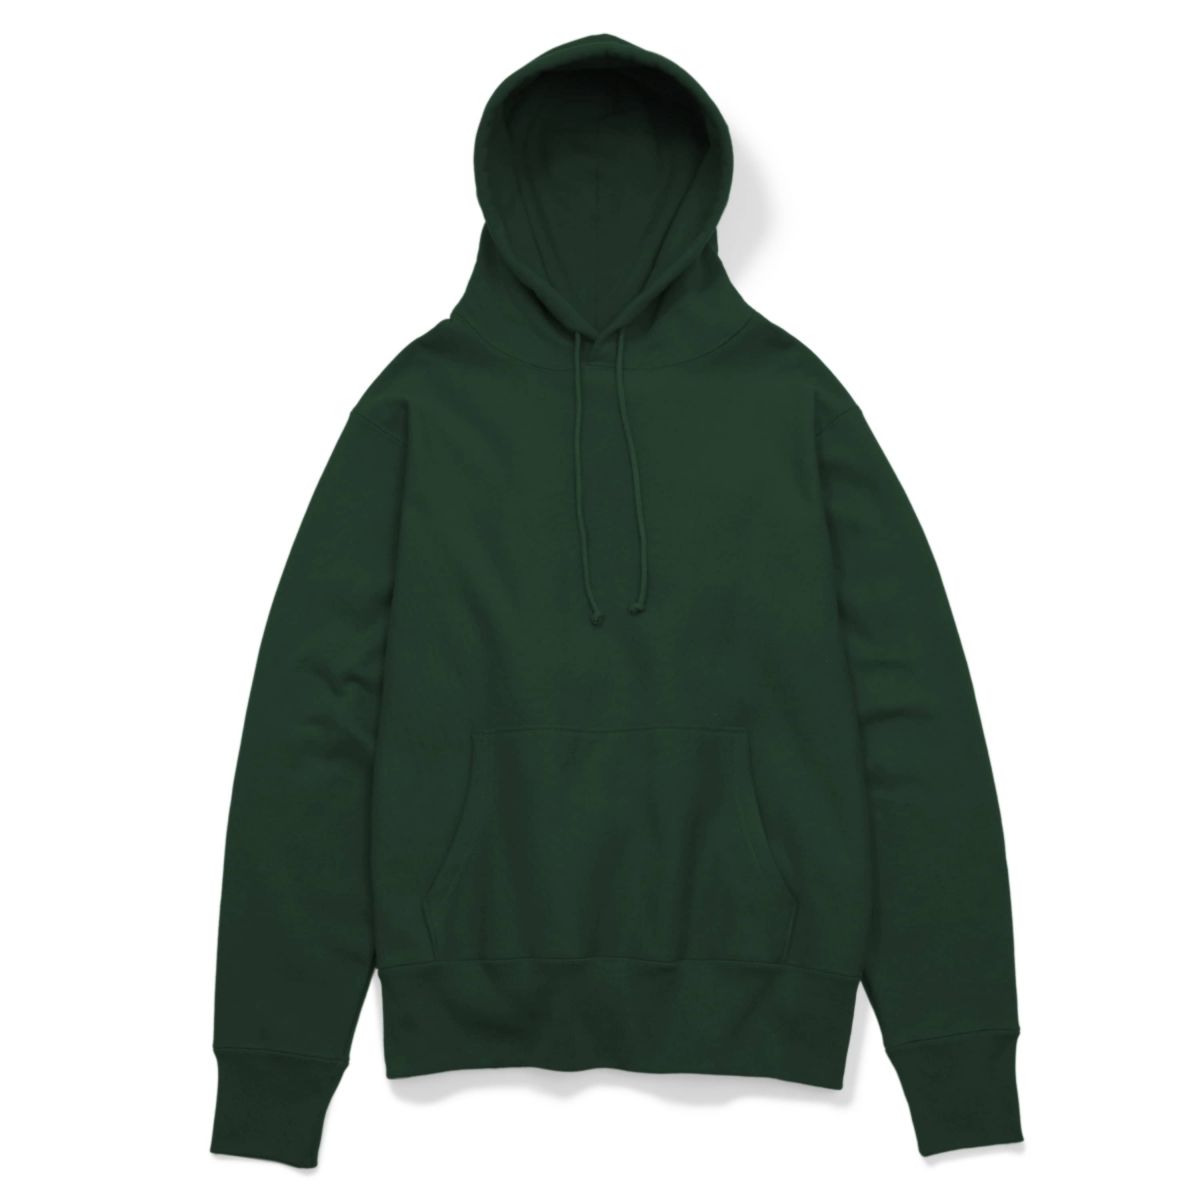 Relaxed Fit Pullover Hooded Sweatshirt